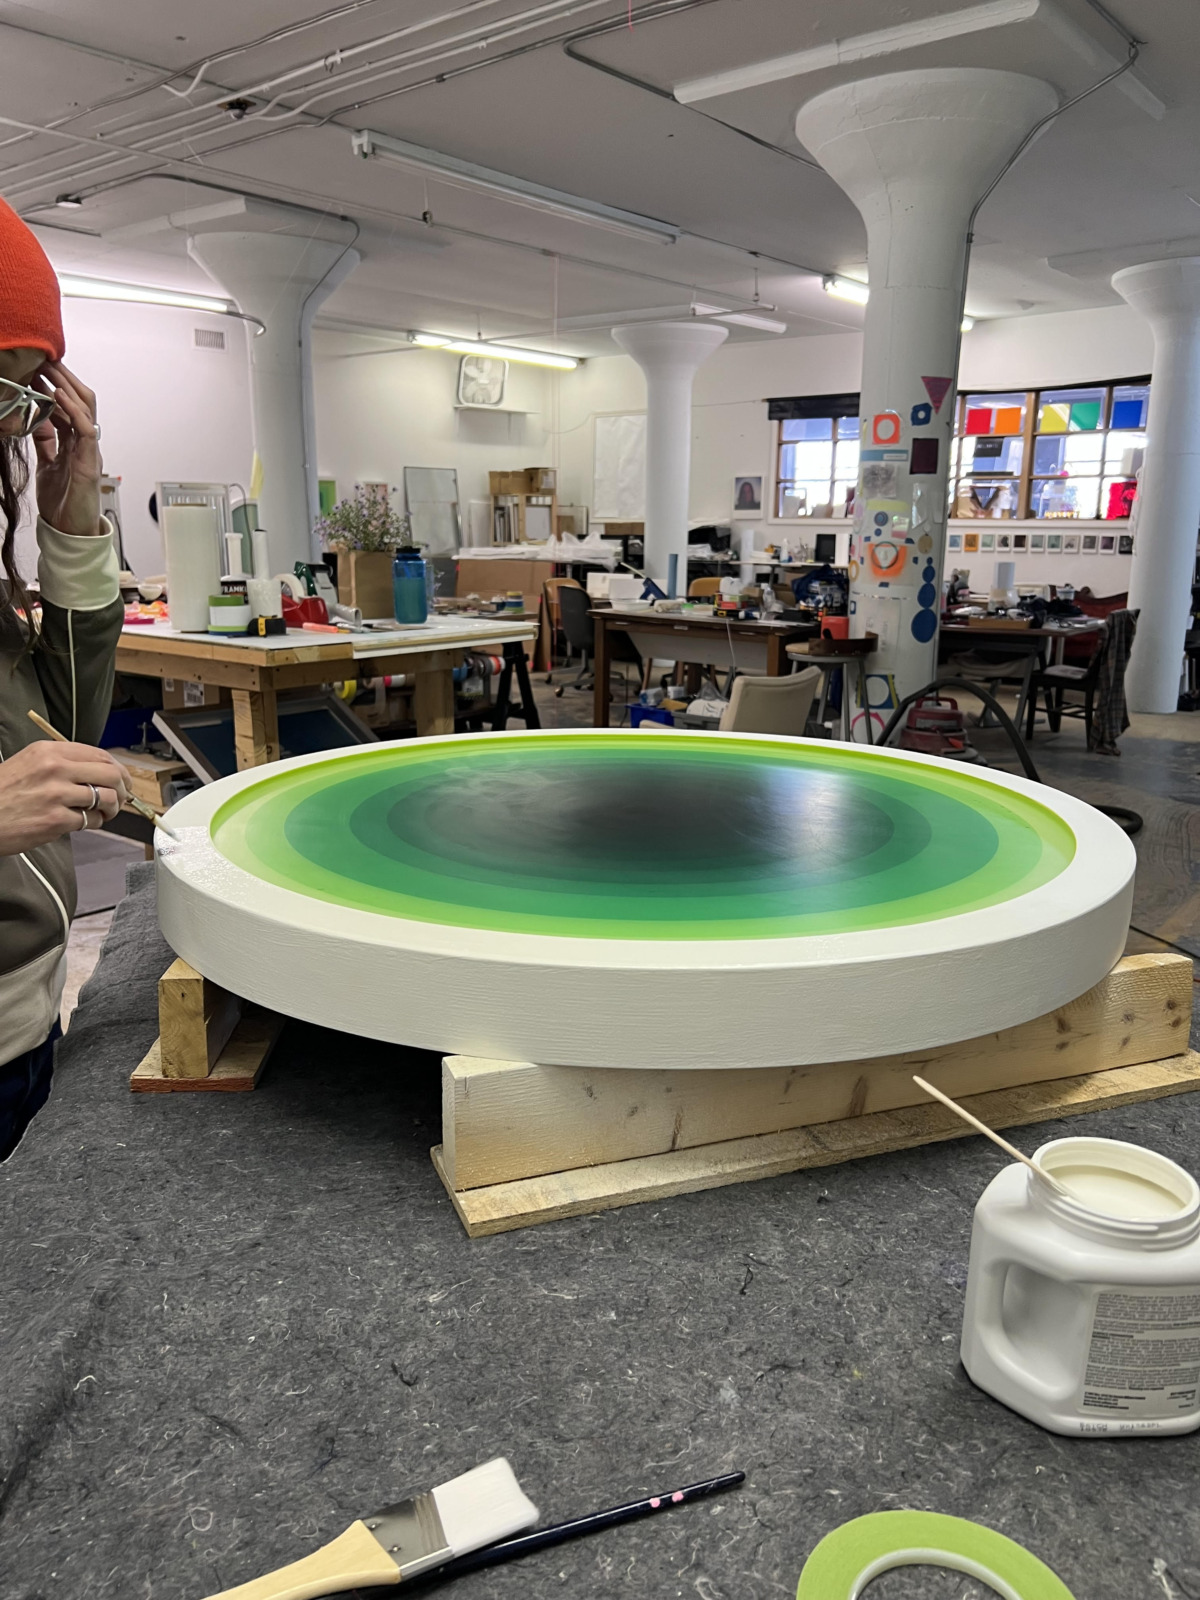 a busy studio with large white pillars, with tables covered in art supplies. in the foreground, a white woman with an orange beanie and rings on her hands works on a large circular painting with reverberating shades of green